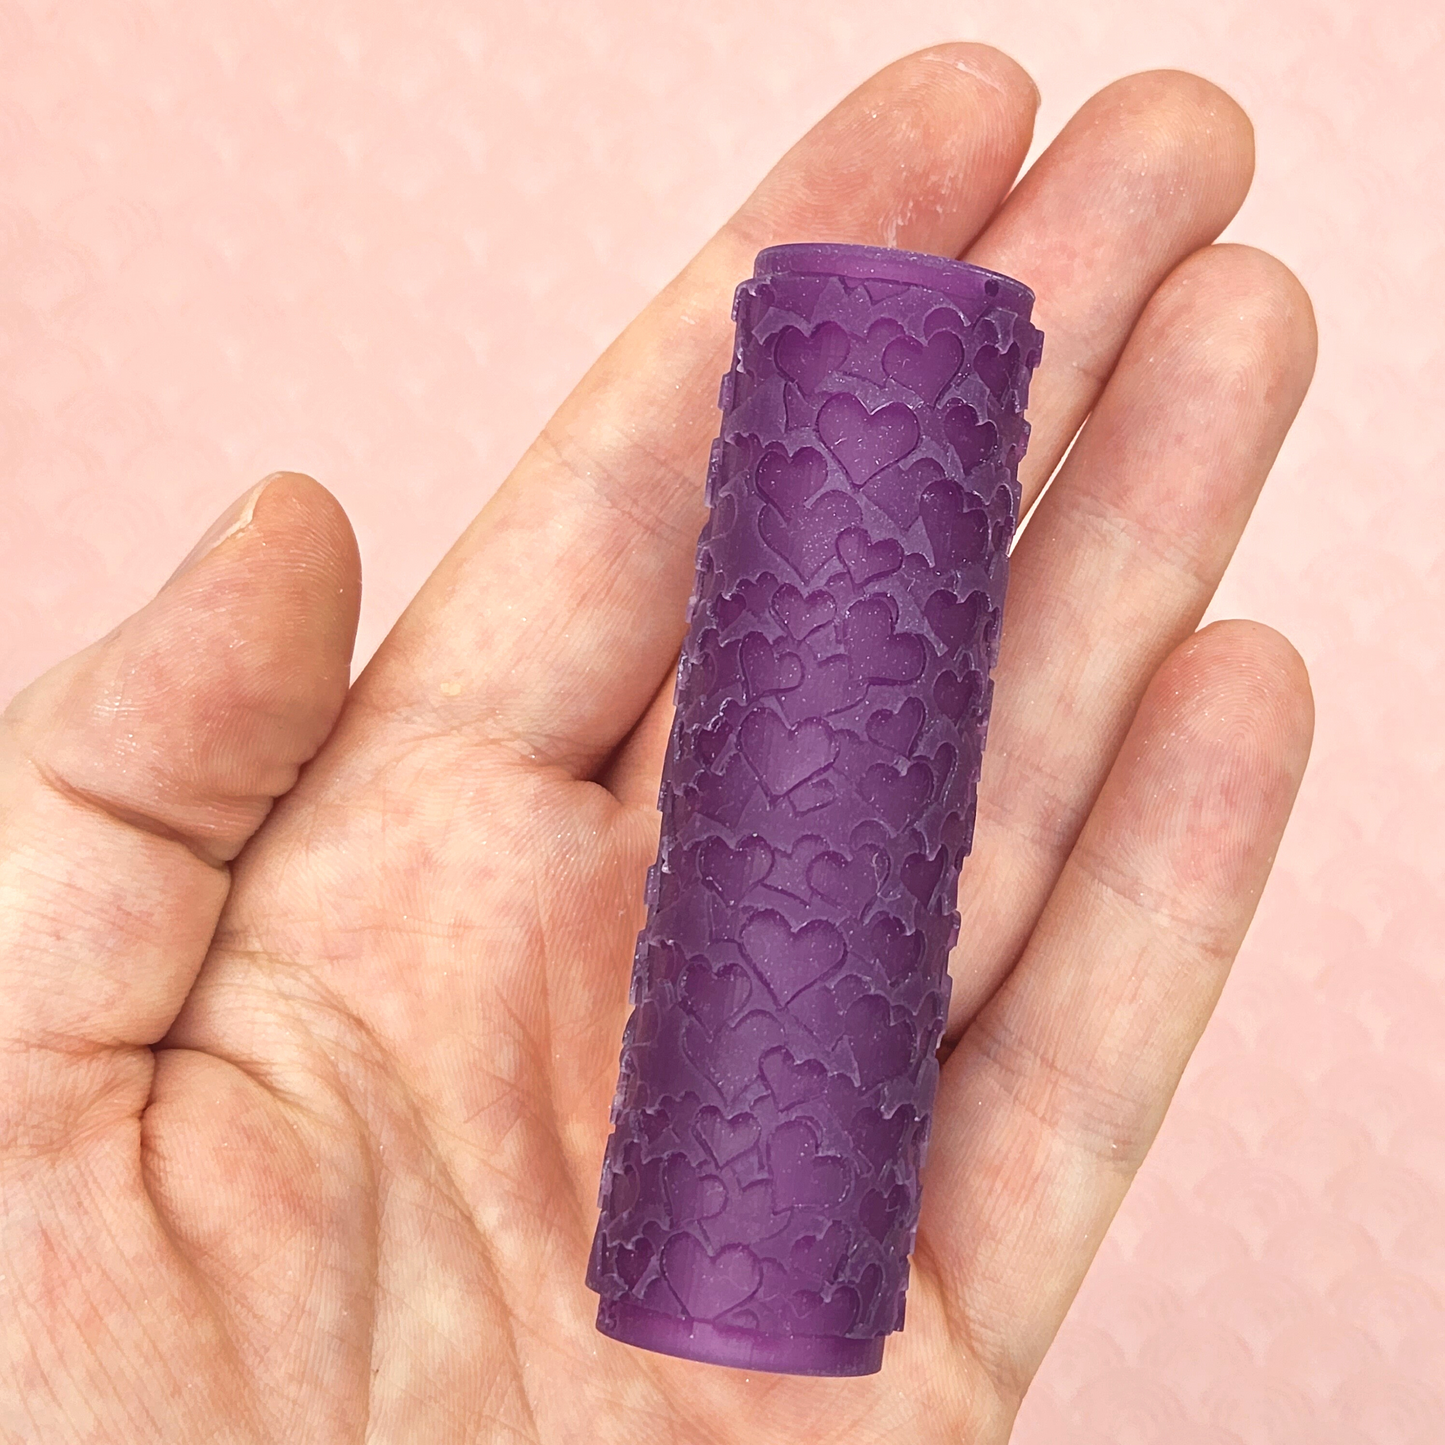 3D printed resin scattered hearts texture roller